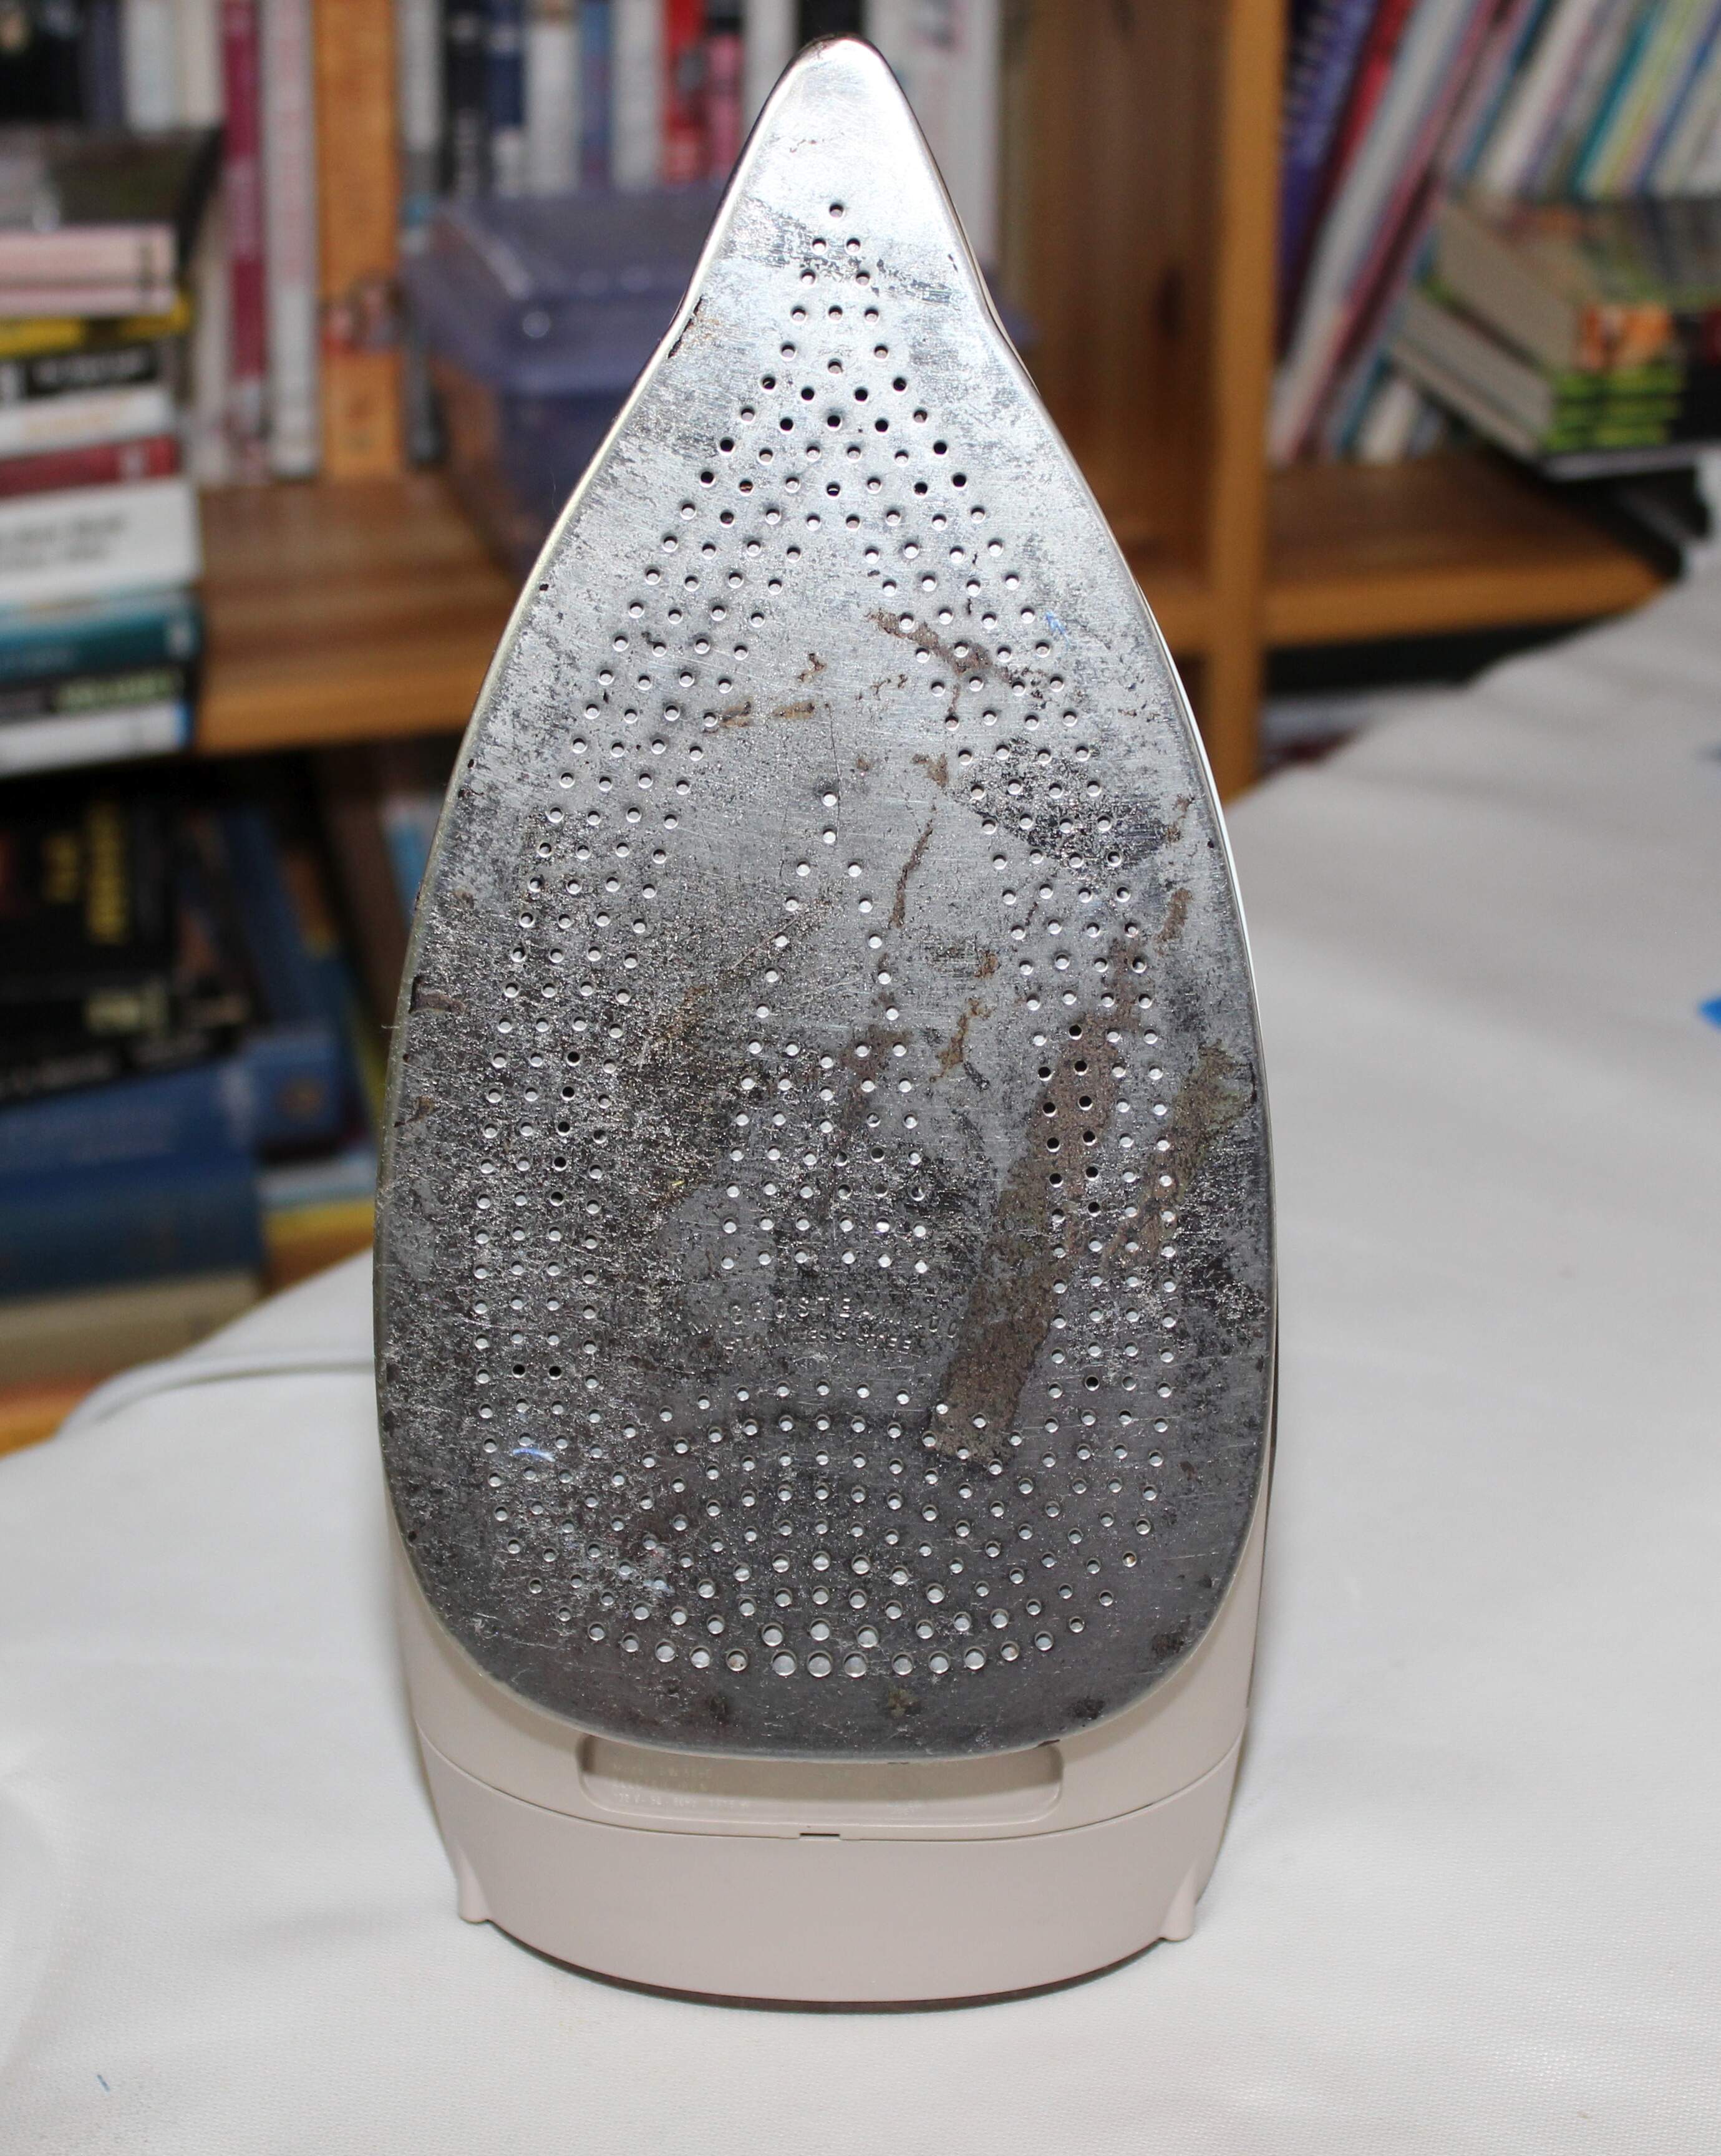 Steam Iron Cleaner Stick, Iron Reactor Cleaner - Removes Build-Up Starch,  Melted Fabric, Glue from Hot Iron - Eliminates Sticky Residue on Any Iron